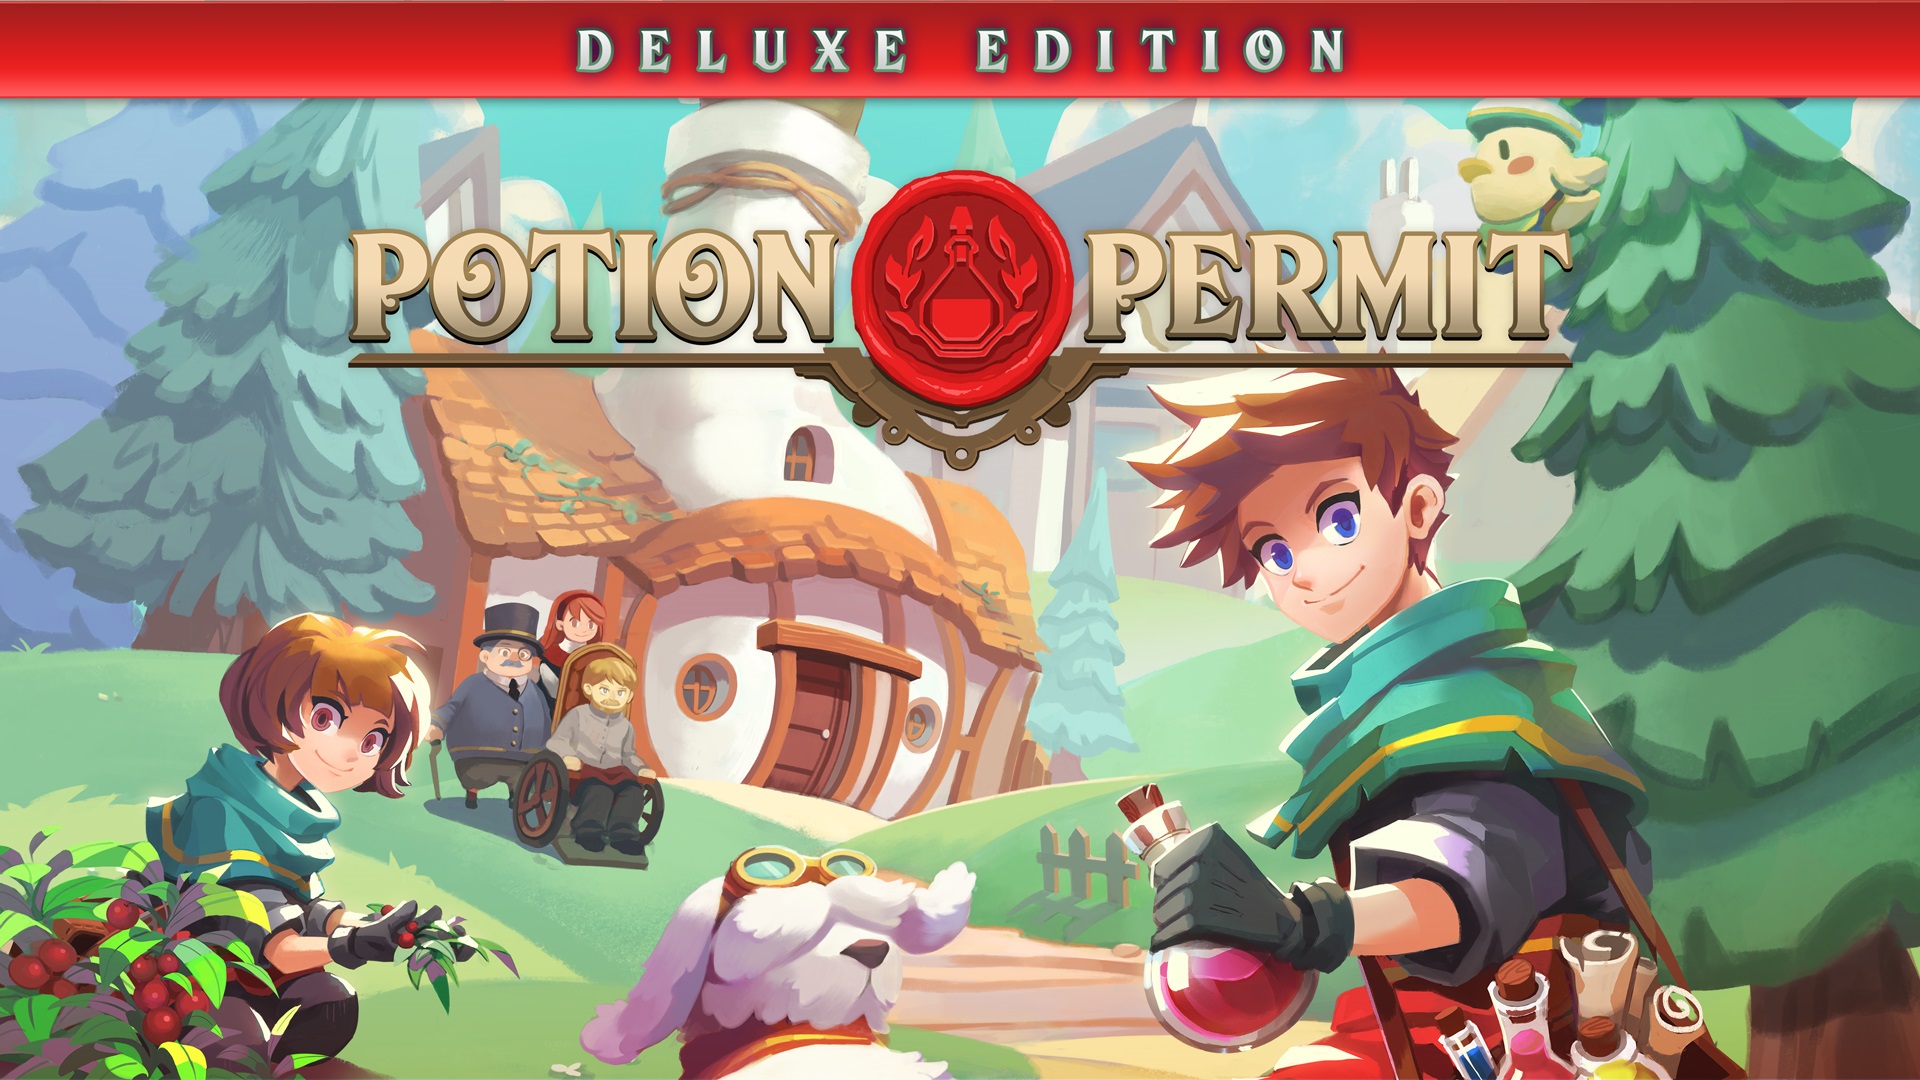 POTION PERMIT DELUXE EDITION Free Download GameTrex